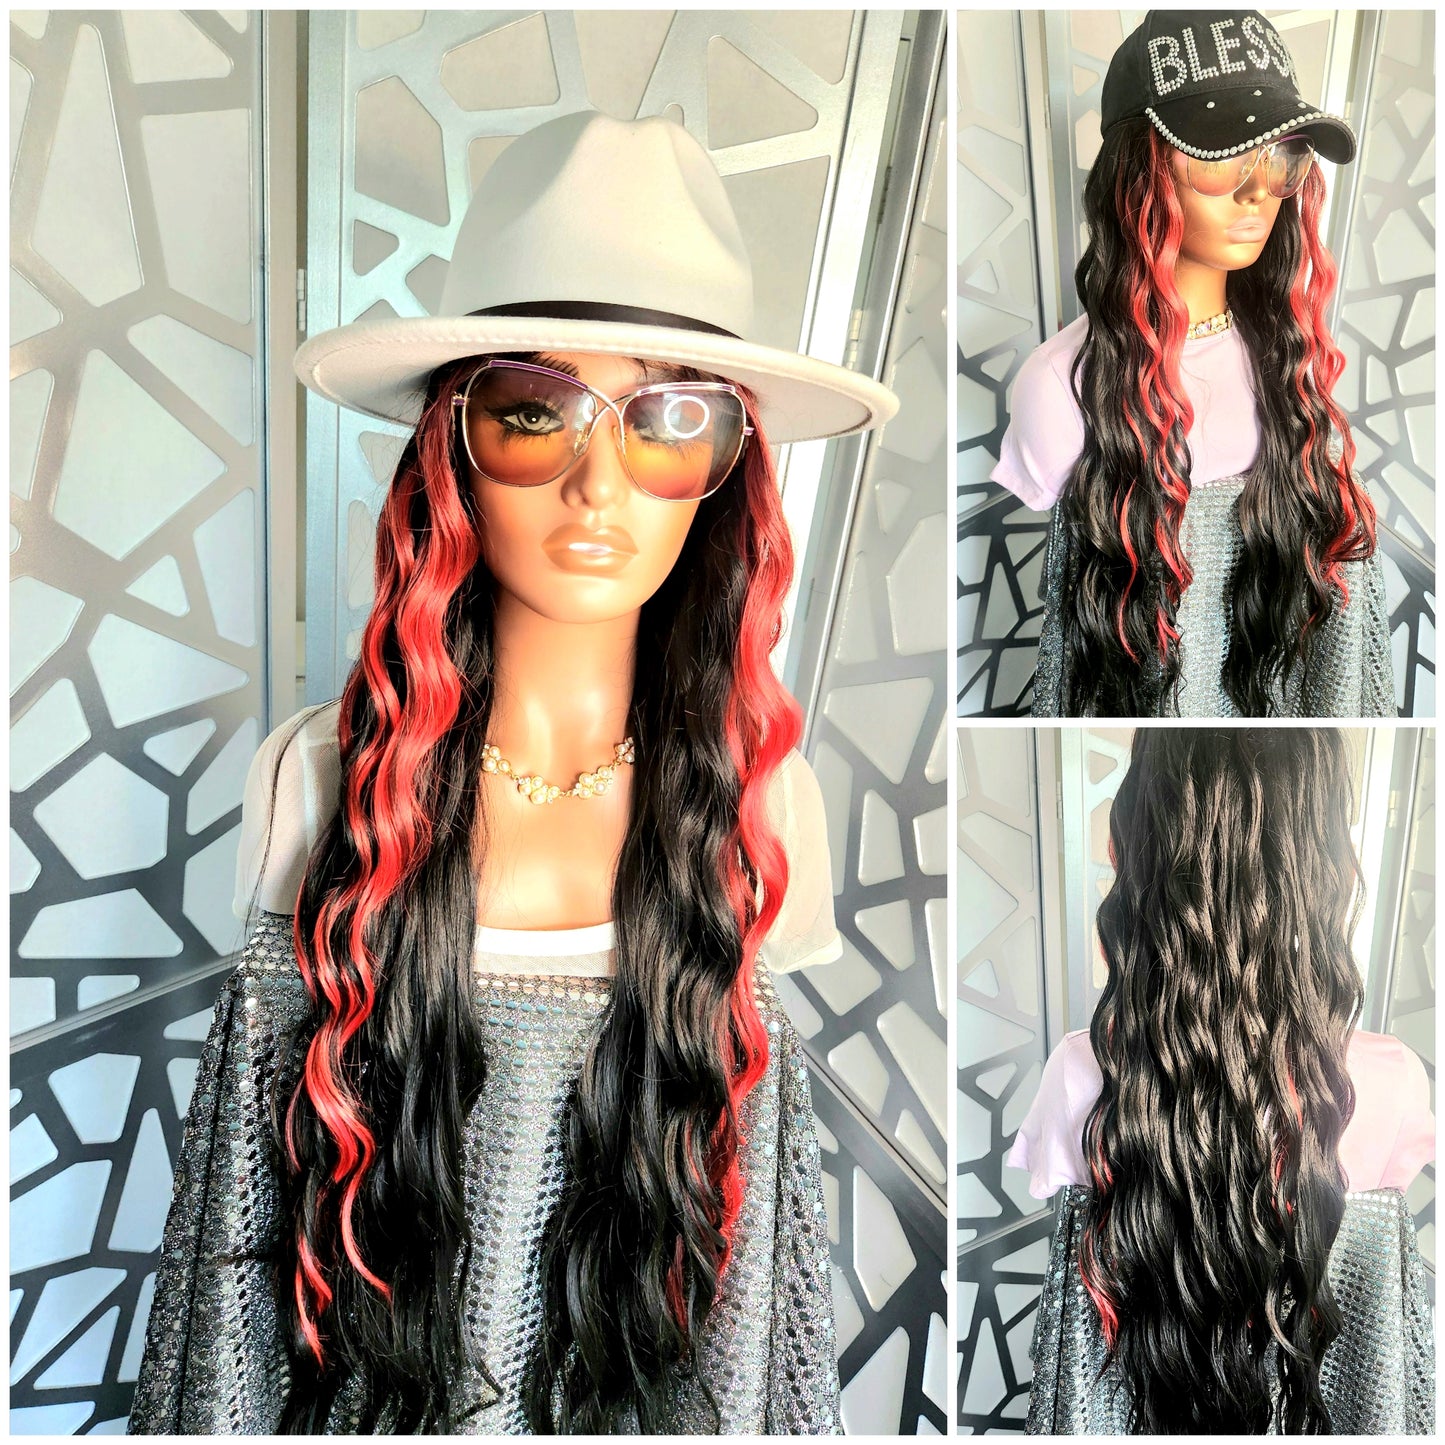 34" Long Black Curly Wig Lace Front Wig Wavy Long Wig Glueless Wig Heat Safe Daily Wear Or Hair Loss